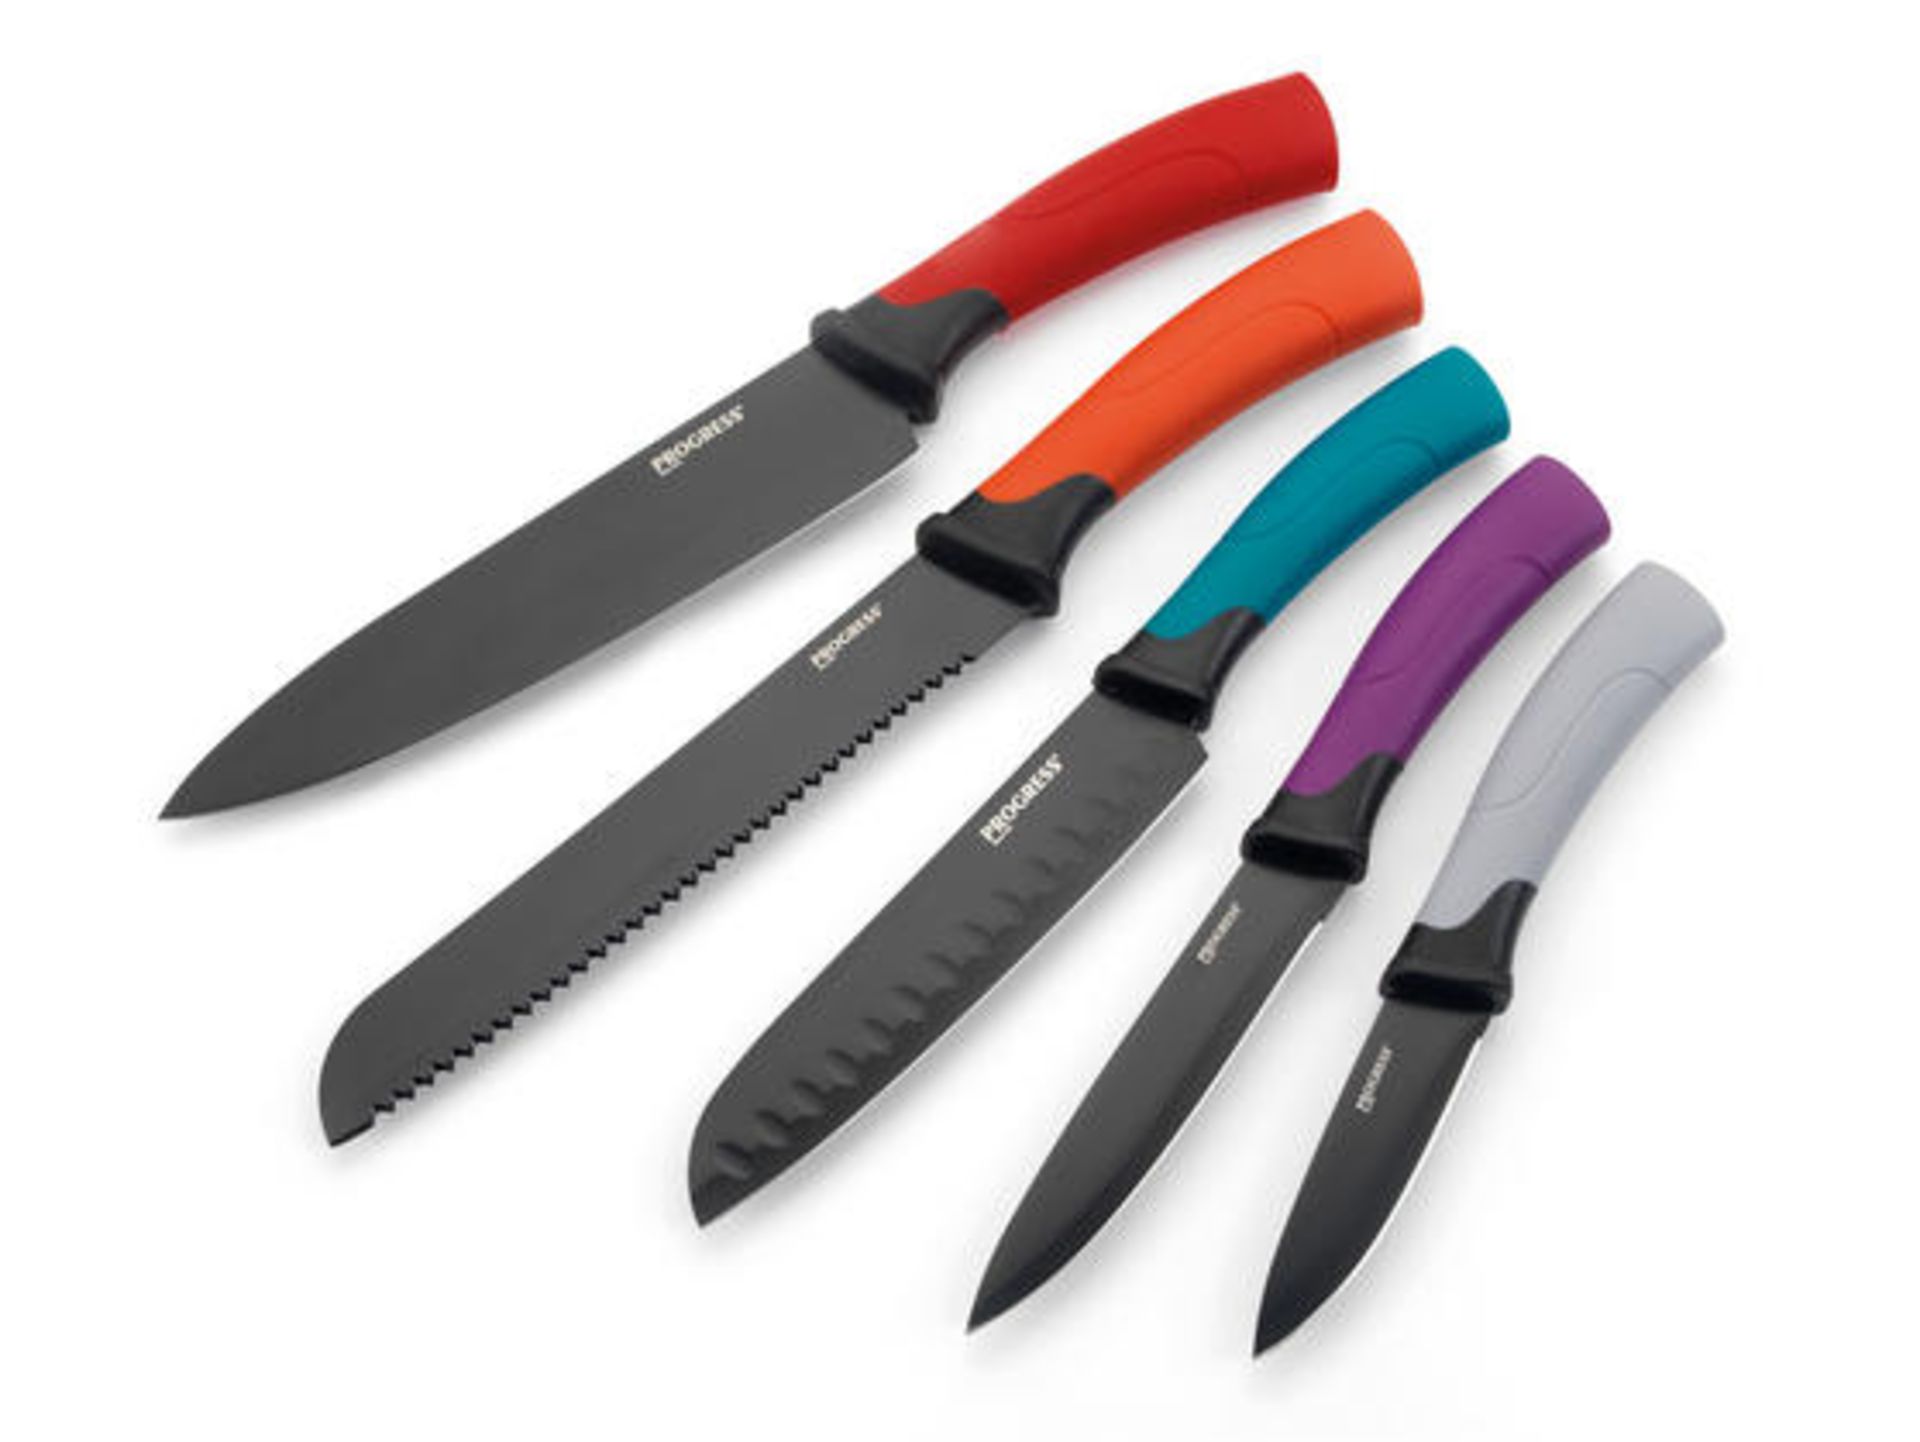 V Brand New Progress 5 Piece Smart Knife Block With Multi Coloured Handles - Secure Block locking - Image 2 of 4